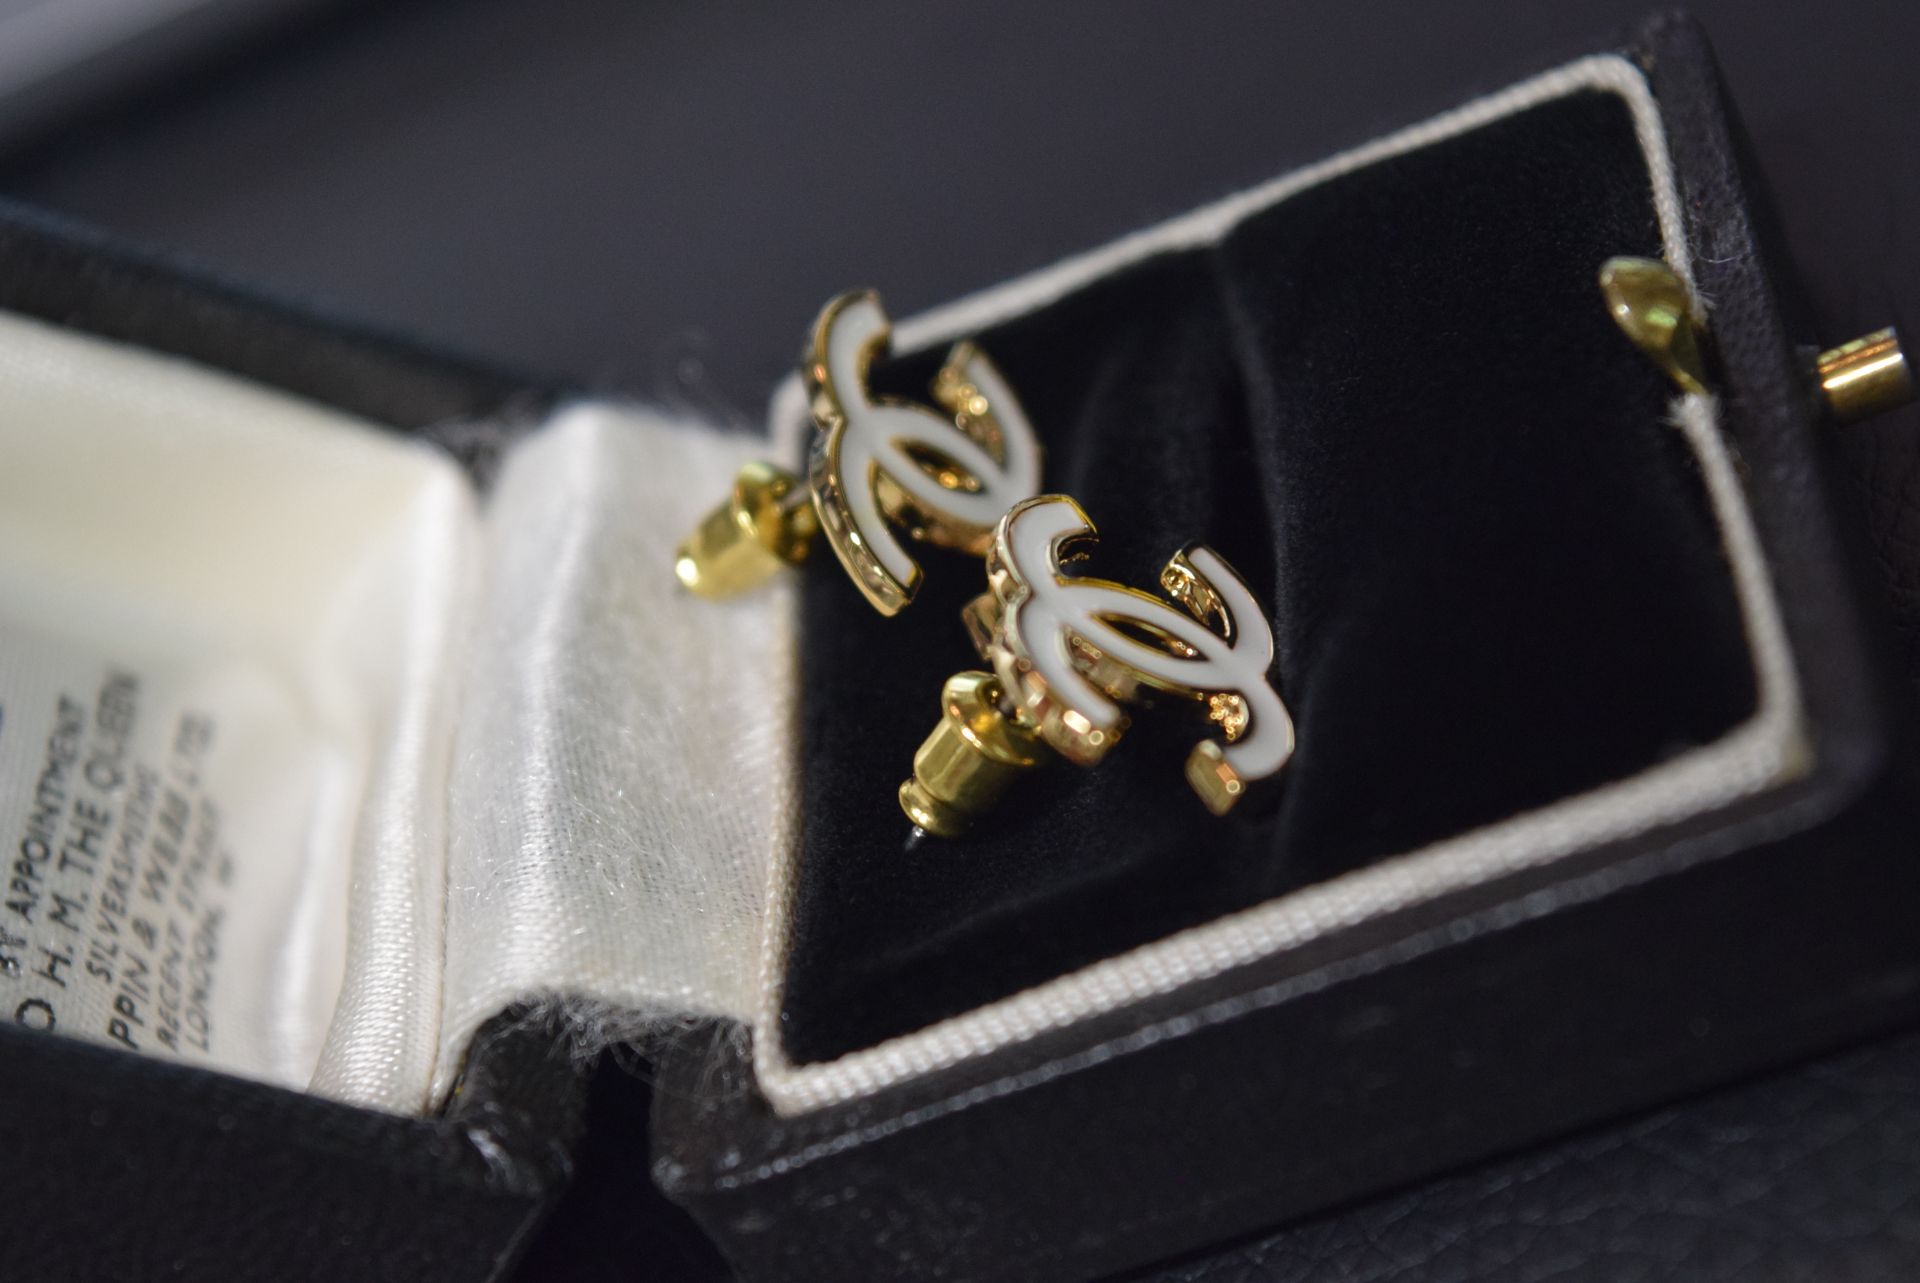 FASHION JEWELLERY EARRINGS (18K GOLD VERMEIL WITH ENAMEL INLAY) - Image 3 of 3